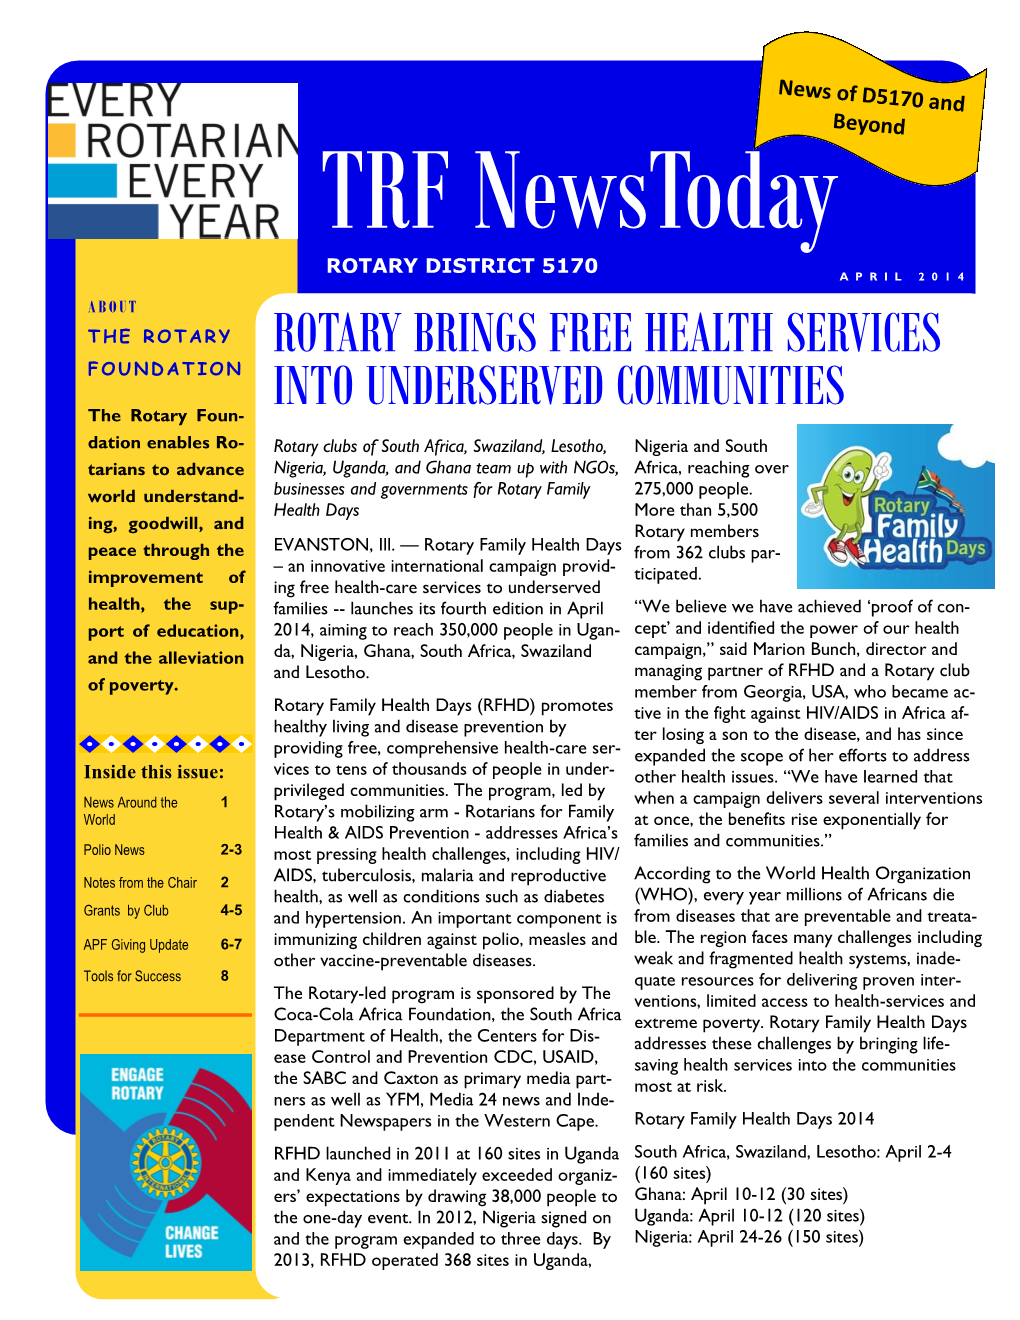 Rotary Brings Free Health Services Into Underserved